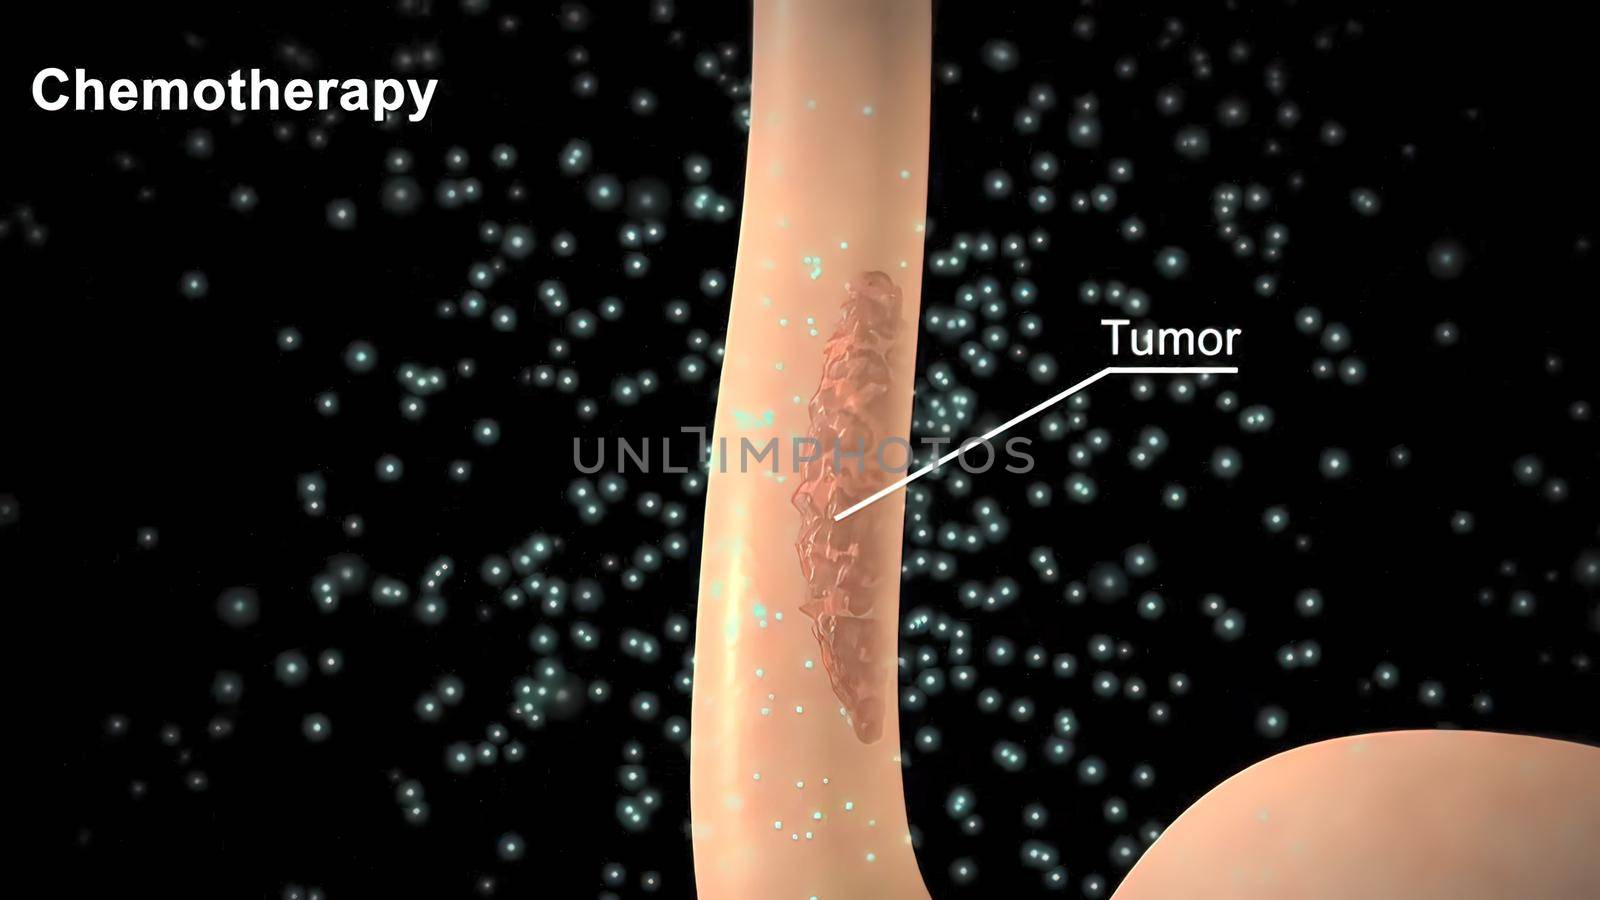 Cancer cell death, tumor death, destruction of normal cells and tissue. It also covers the side effects associated with chemotherapy treatments. 3D illustration